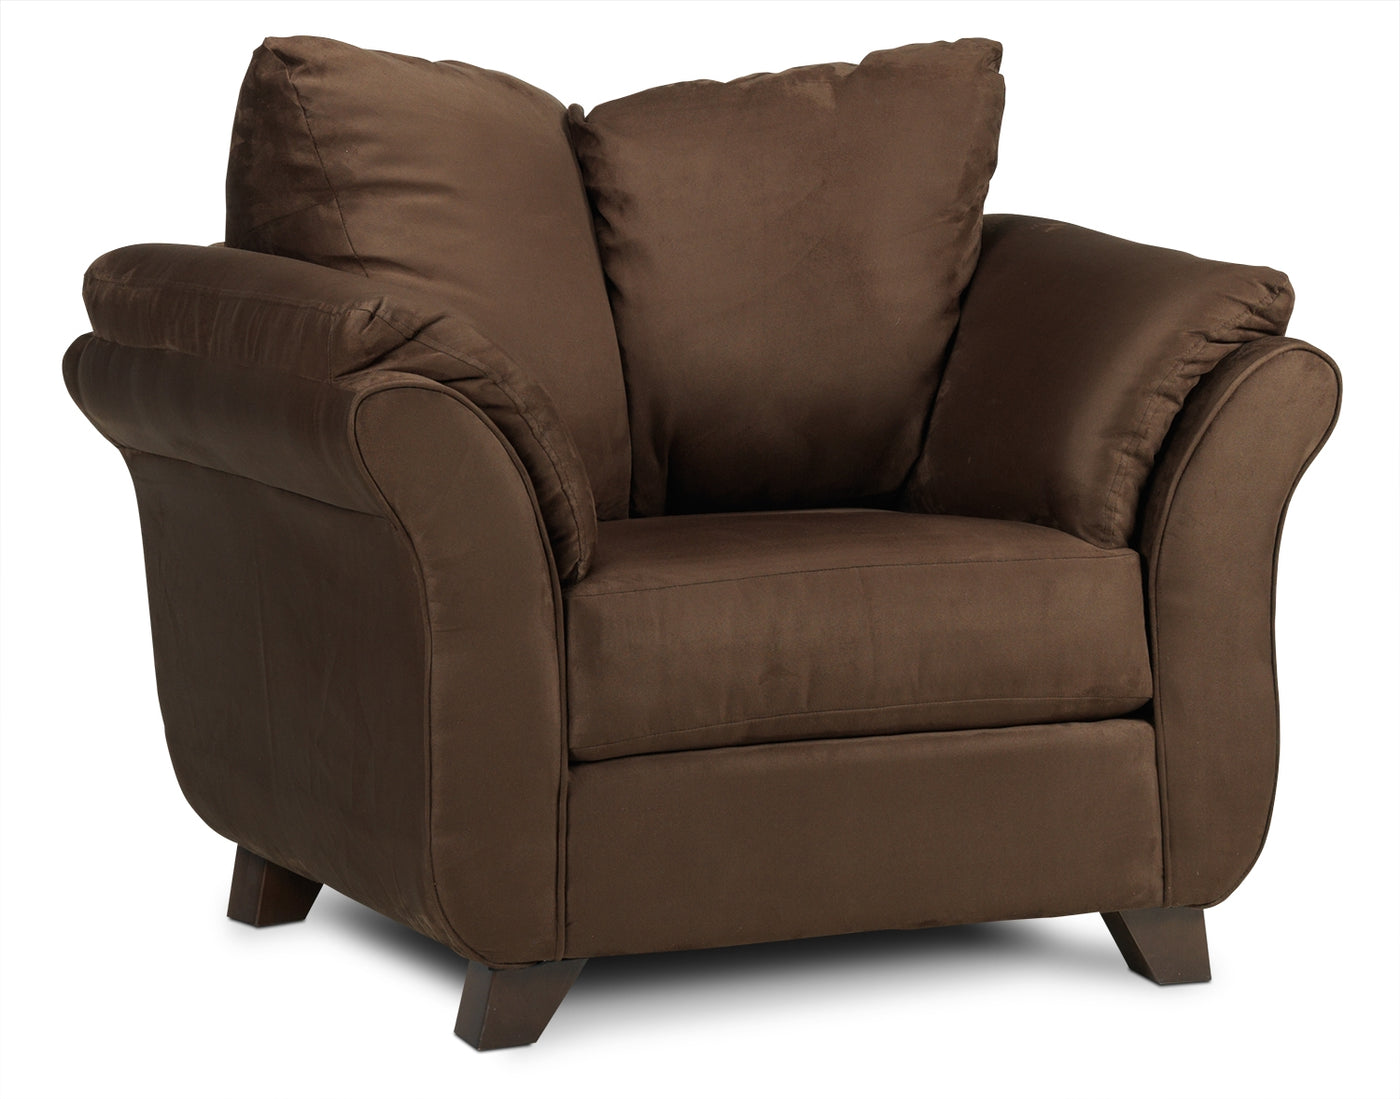 Collier 3 Pc. Living Room Package - Chocolate